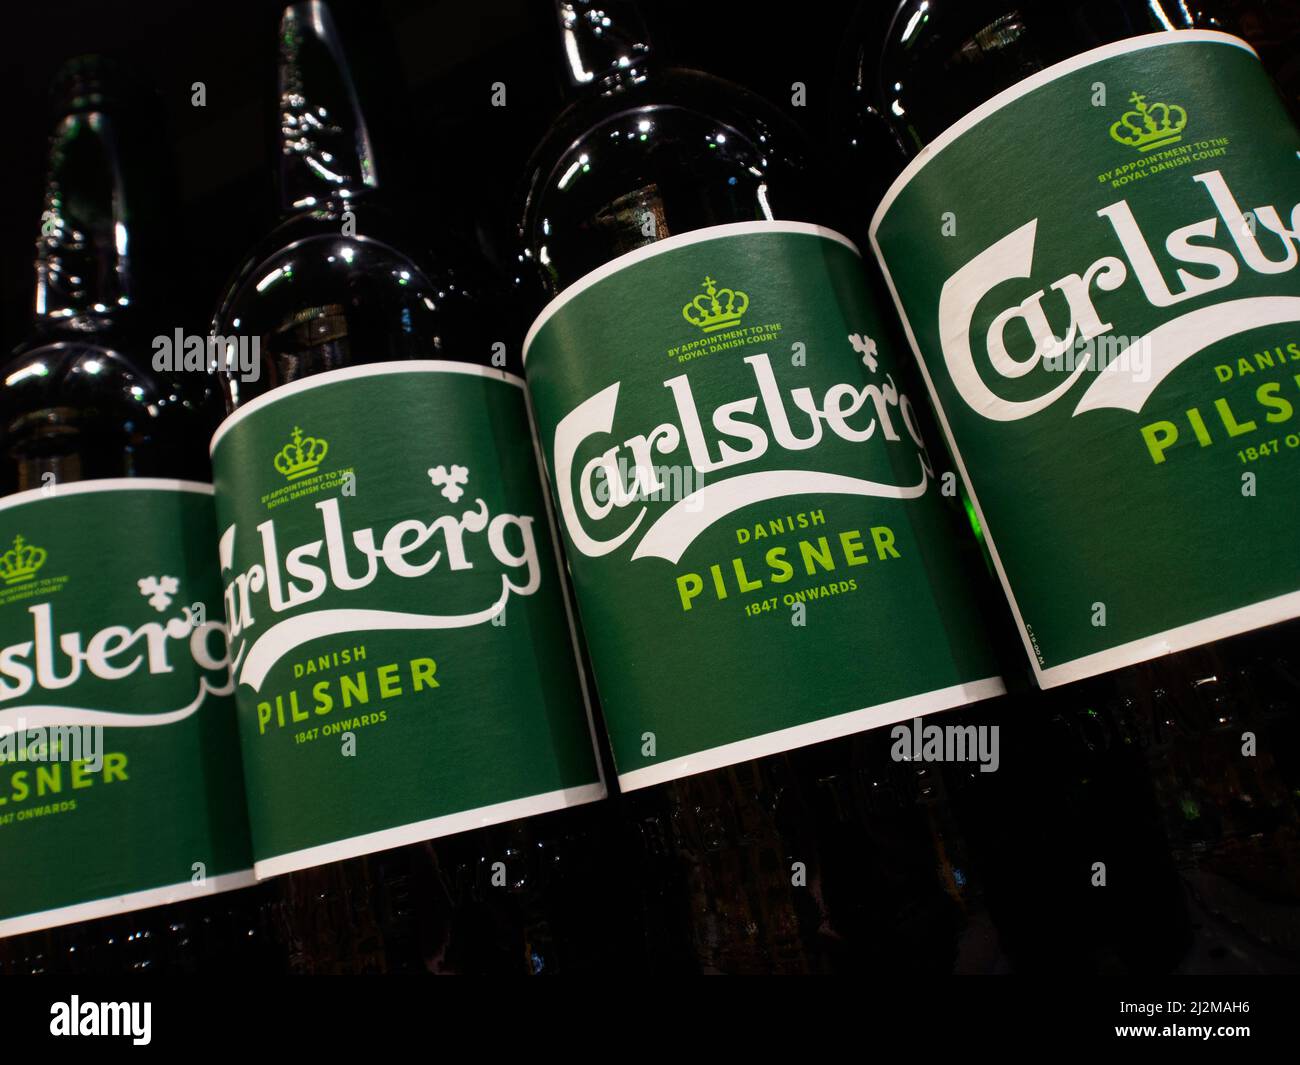 Bottled Carlsberg beer seen on a supermarket shelf. It was reported that Carlsberg Group is leaving the Russian market and plans to transfer the local business to a new investor. The Danish brewing company 'Carlsberg' is represented in Russia by the brands 'Carlsberg', 'Kronenbourg', 'Holsten' and 'Tuborg' Stock Photo